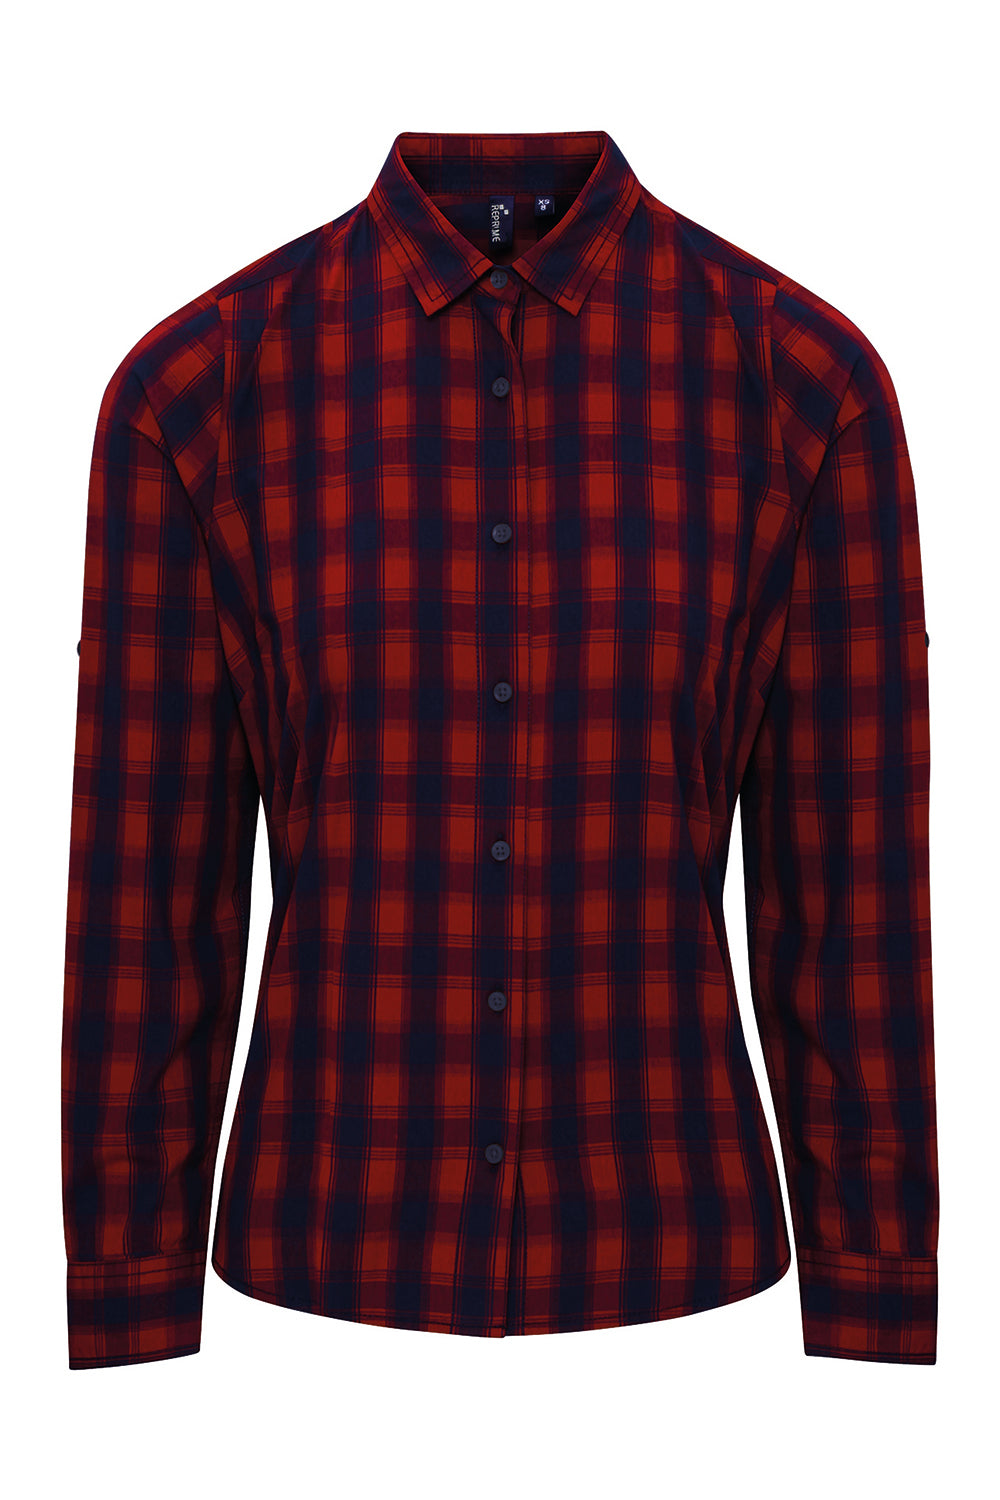 Artisan Collection RP350 Womens Mulligan Check Long Sleeve Button Down Shirt Red/Navy Blue Model Flat Front